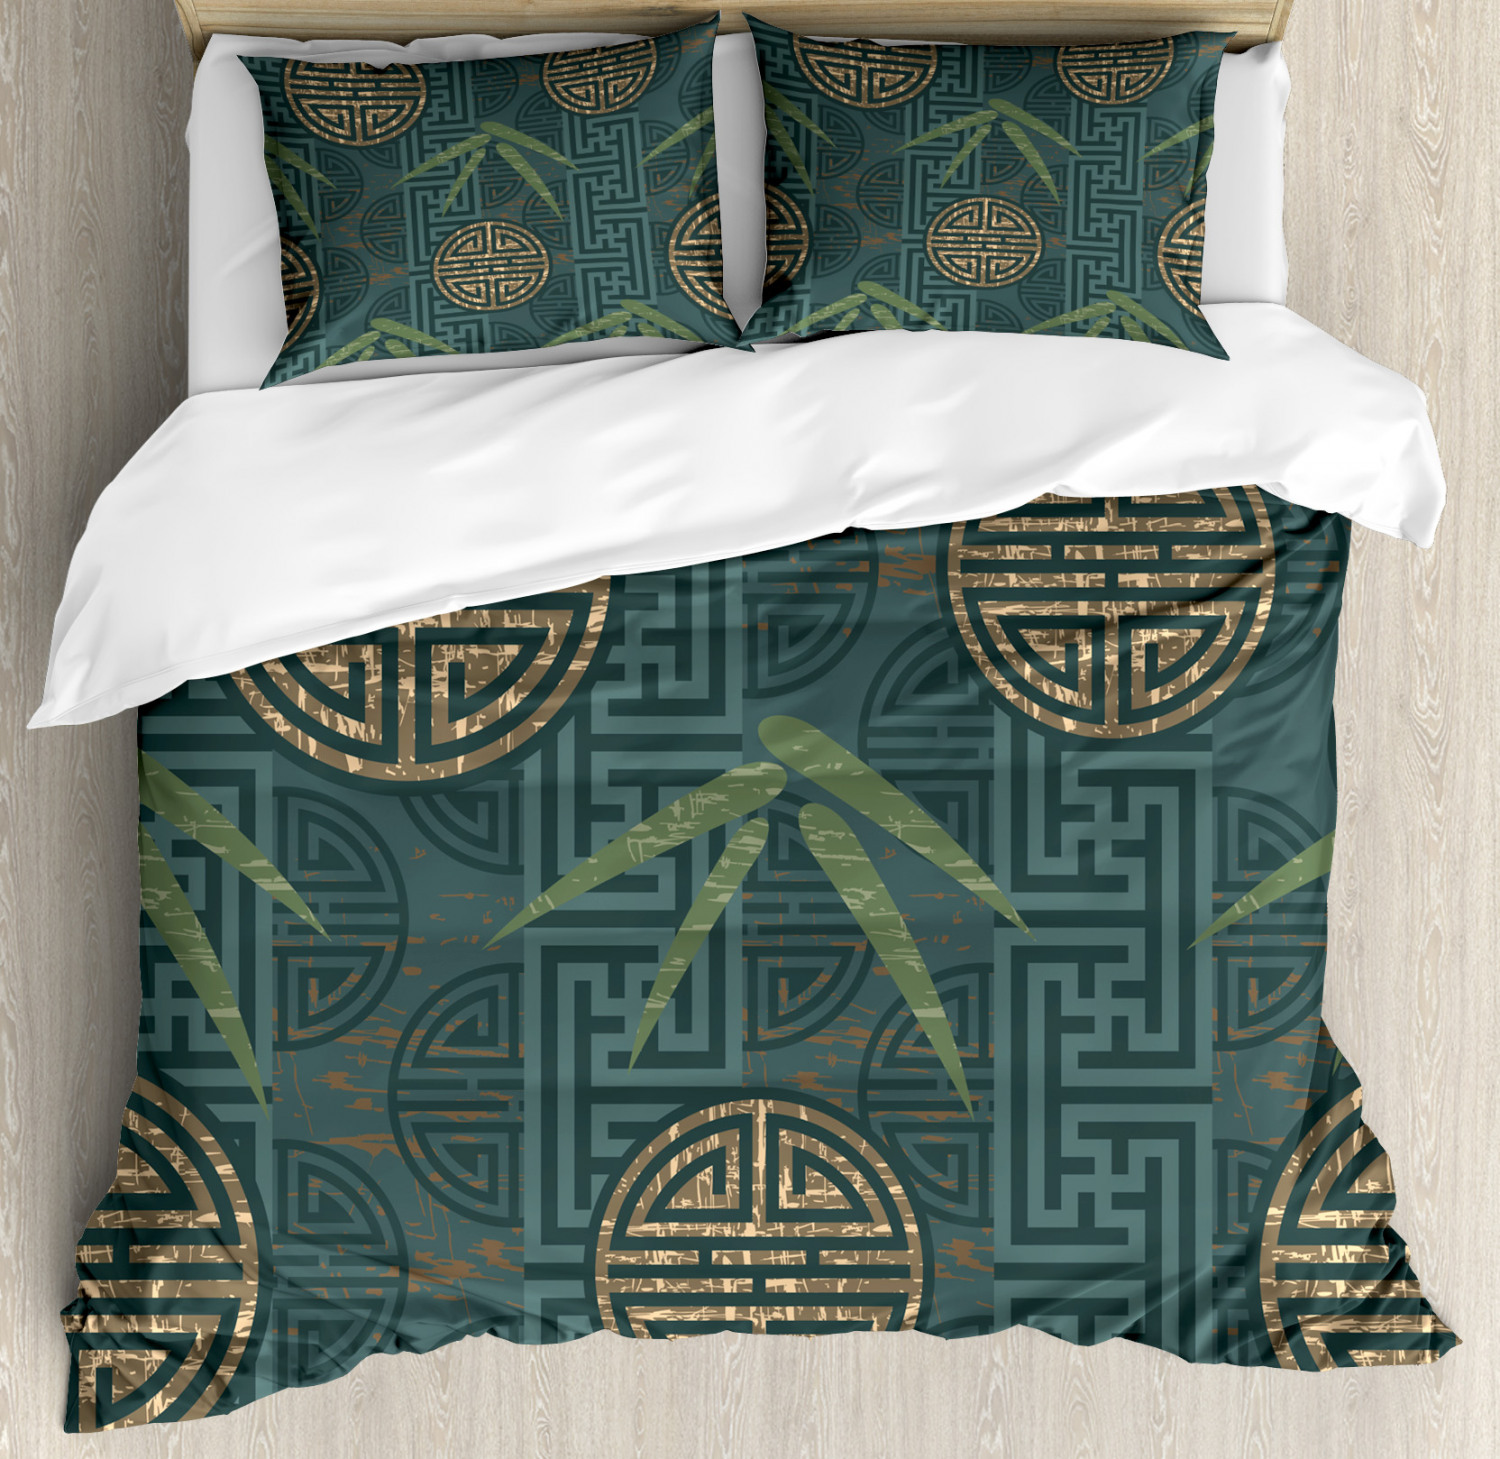 Bamboo Duvet Cover Set With Pillow Shams Authentic Asian Motifs